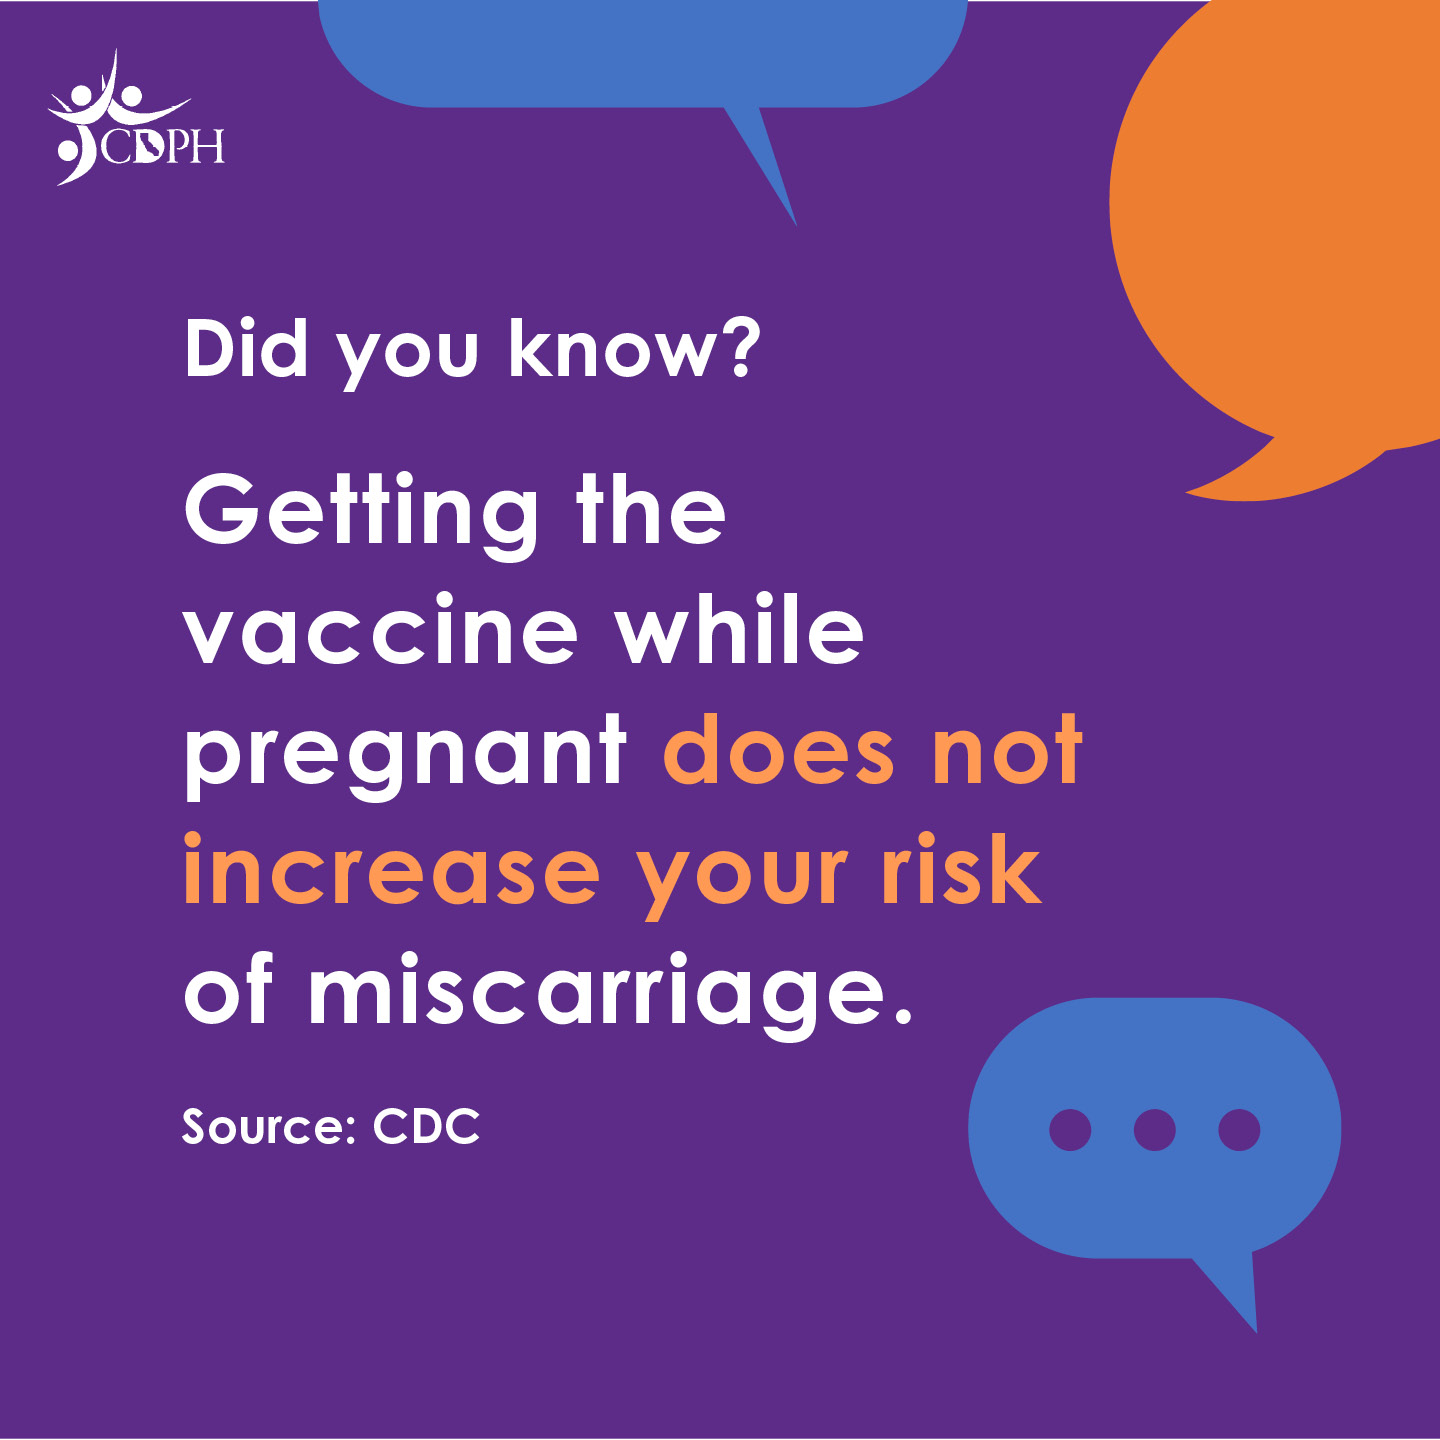 Getting the vaccine while pregnant does not increase your risk of miscarriage.